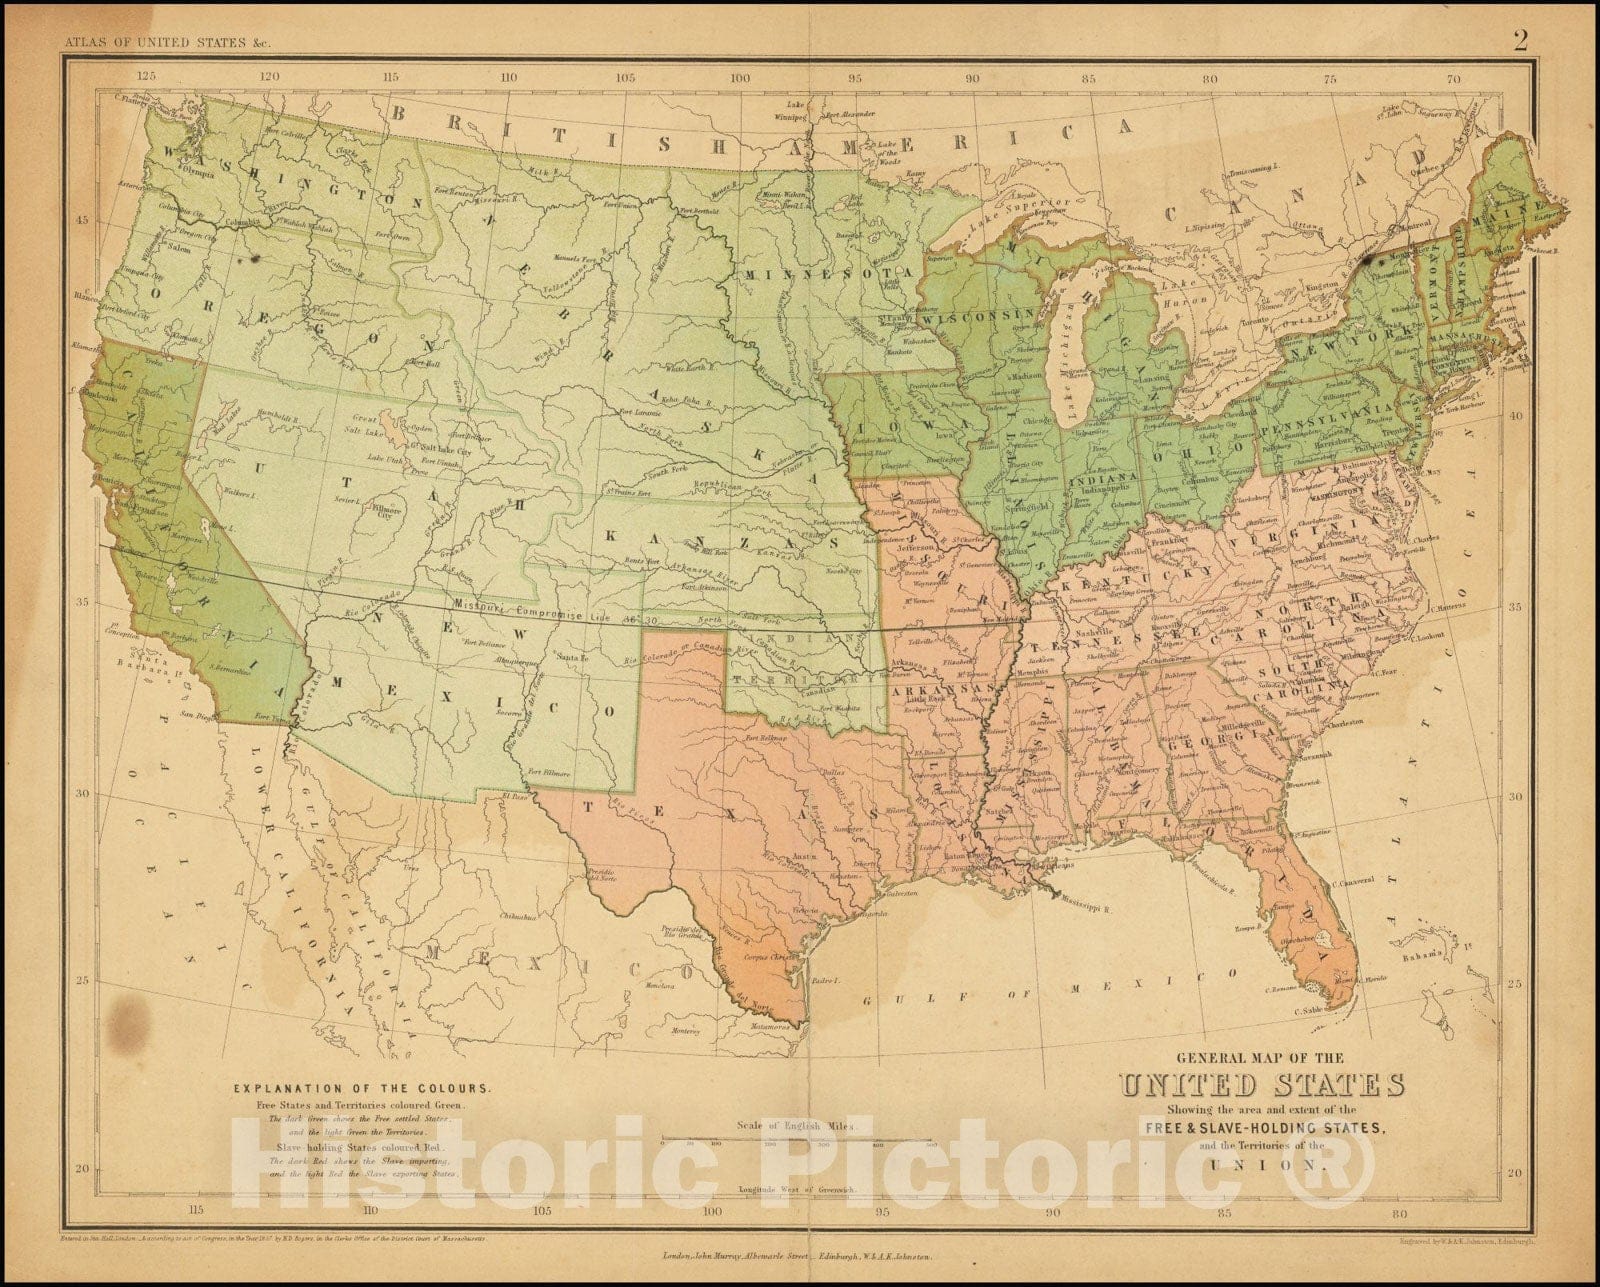 Historic Map : General United States Showing the area and extent of the Free & Slave-Holding States and the Territories of the Union., 1857 v1, Vintage Wall Art